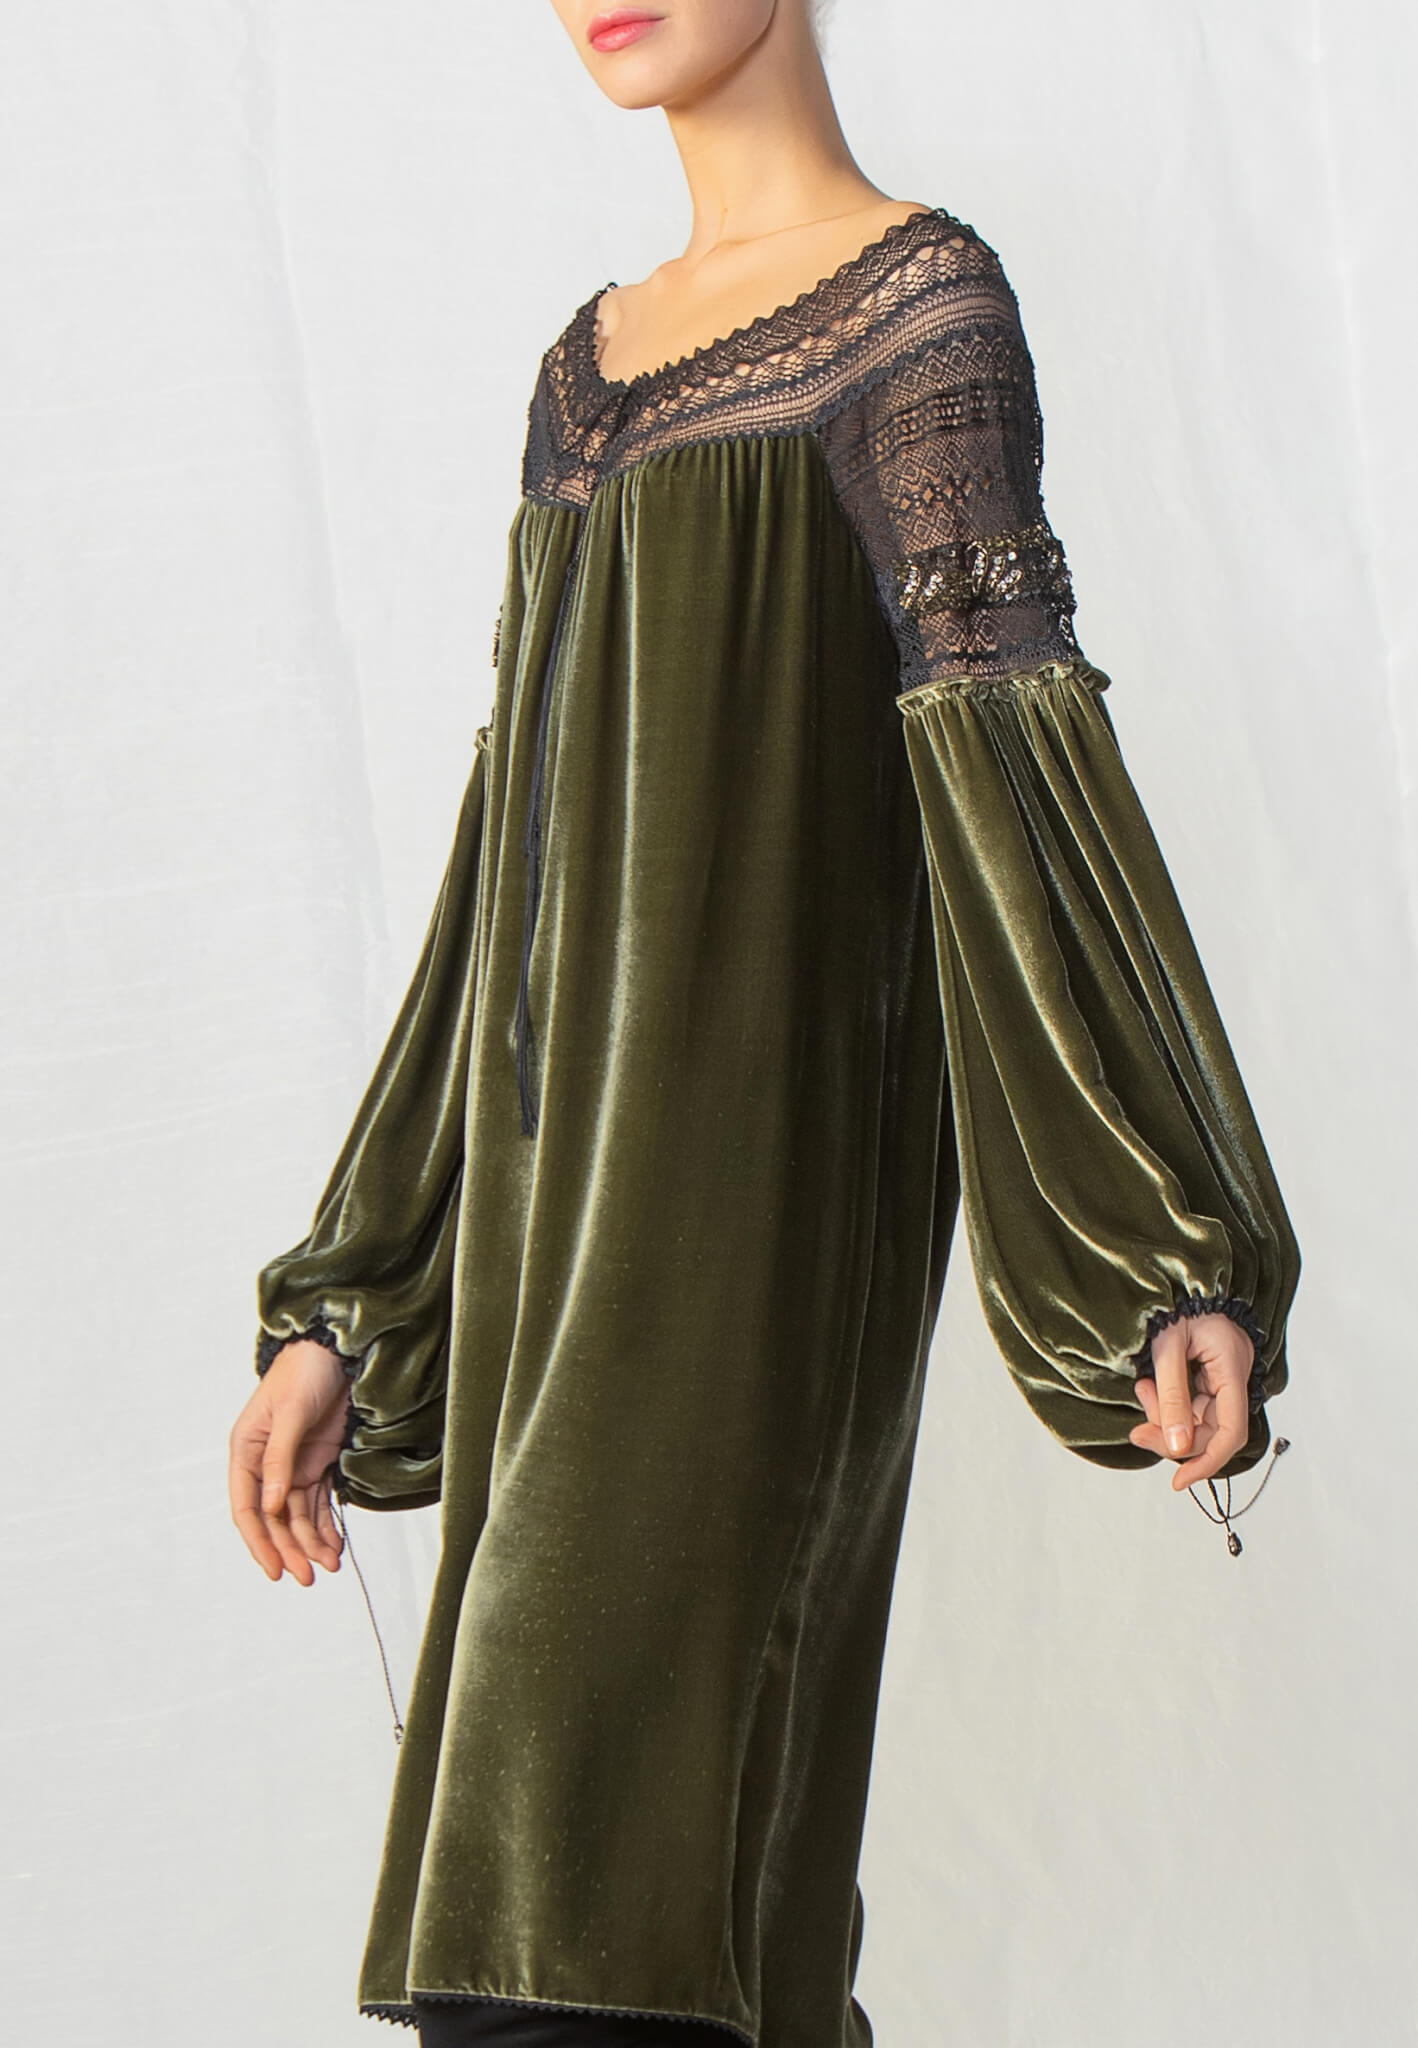 Green velour dress with lace